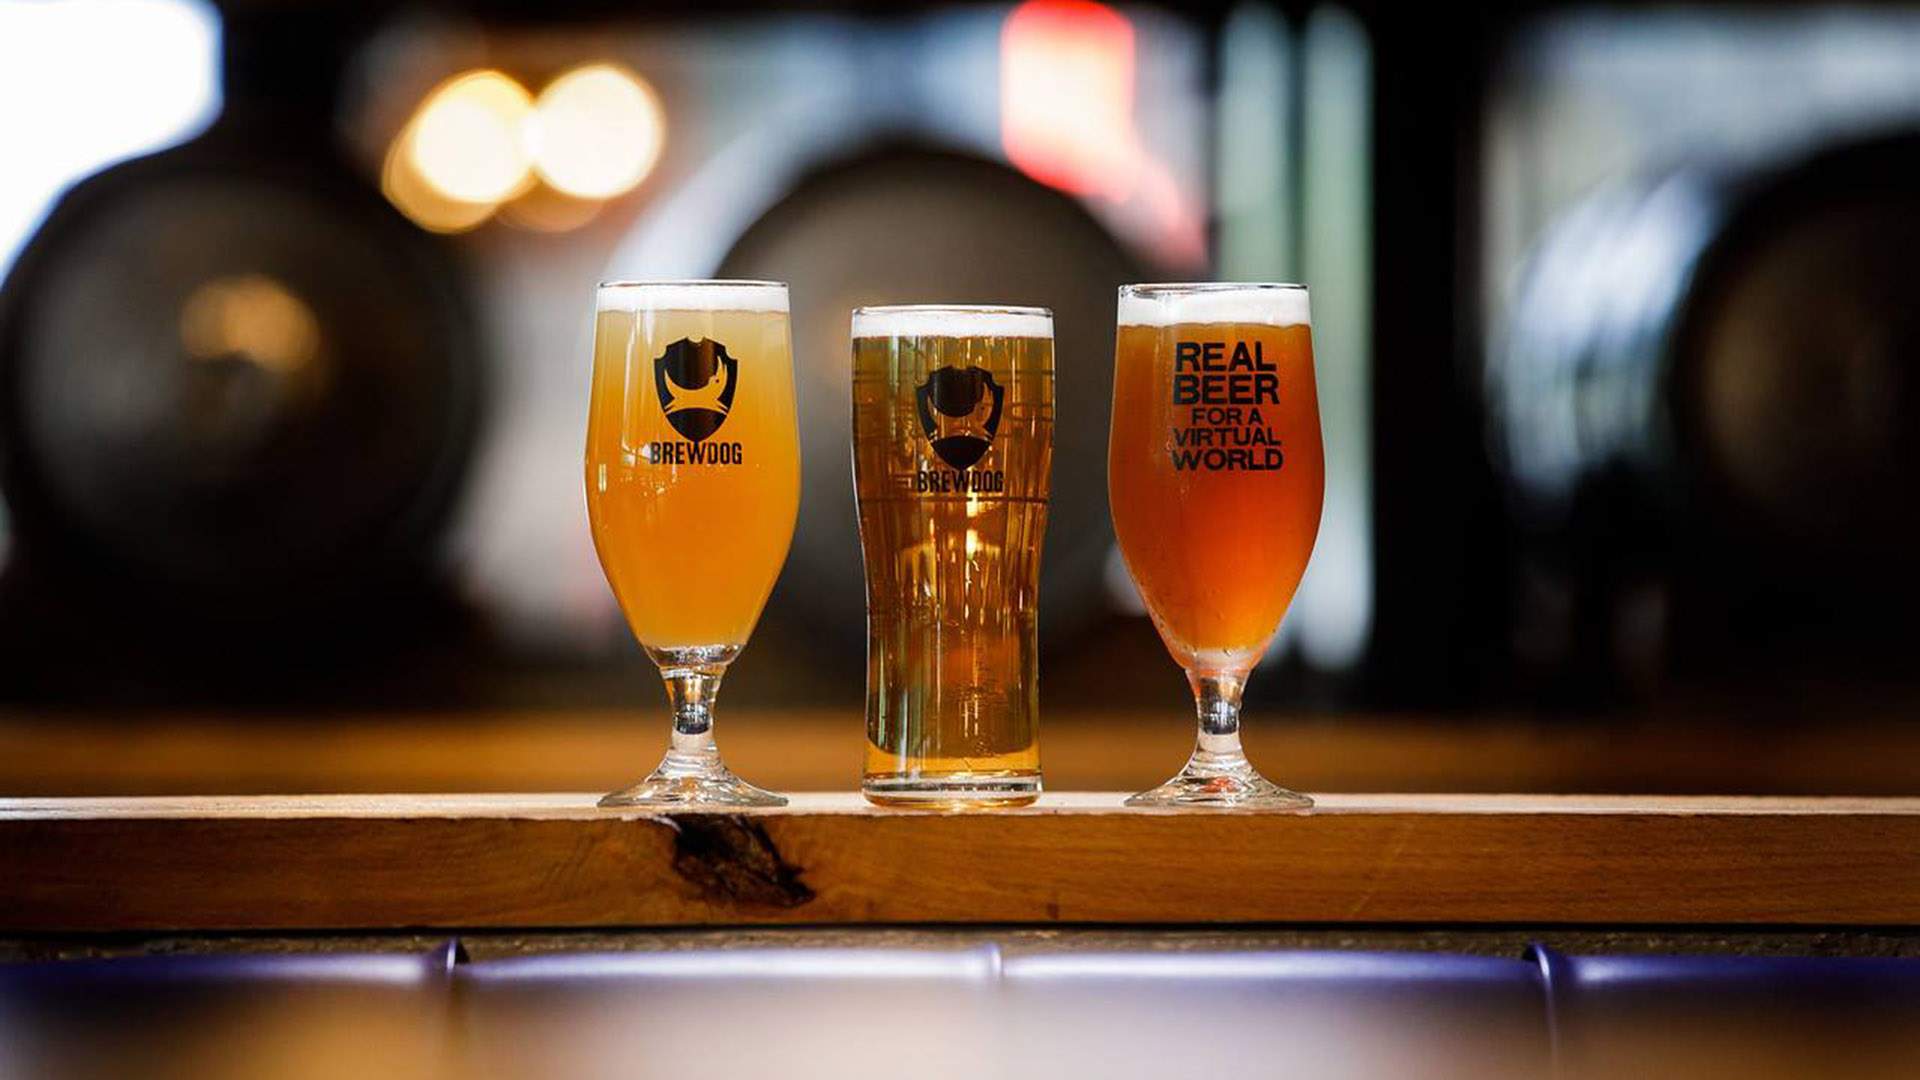 The First Melbourne Brew Bar From Scottish Beer Giant BrewDog Opens Next Week